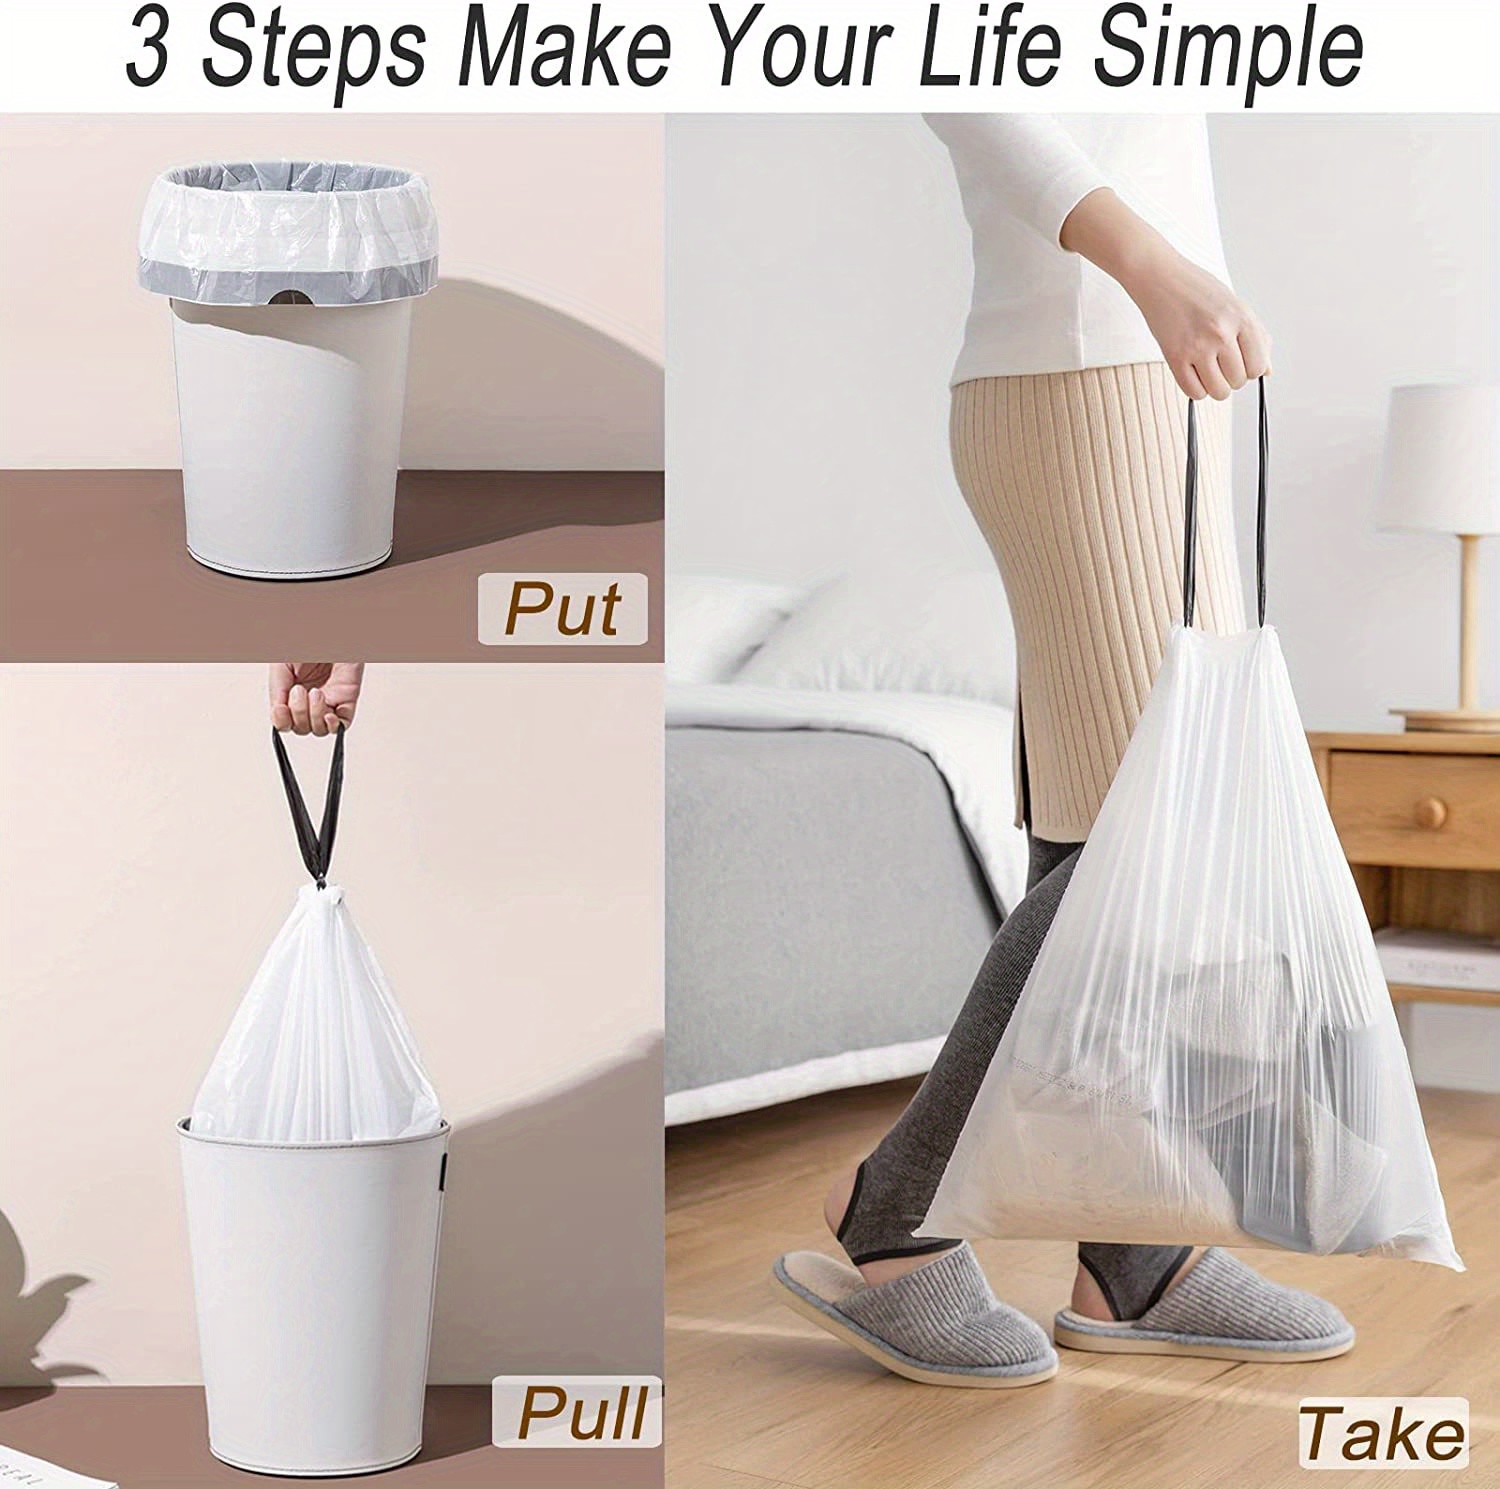 Trash Bags - Drawstring trash Bags for Bathroom, Kitchen, Bedroom, Office,  75 pcs (Upgraded - Easy to Separate)